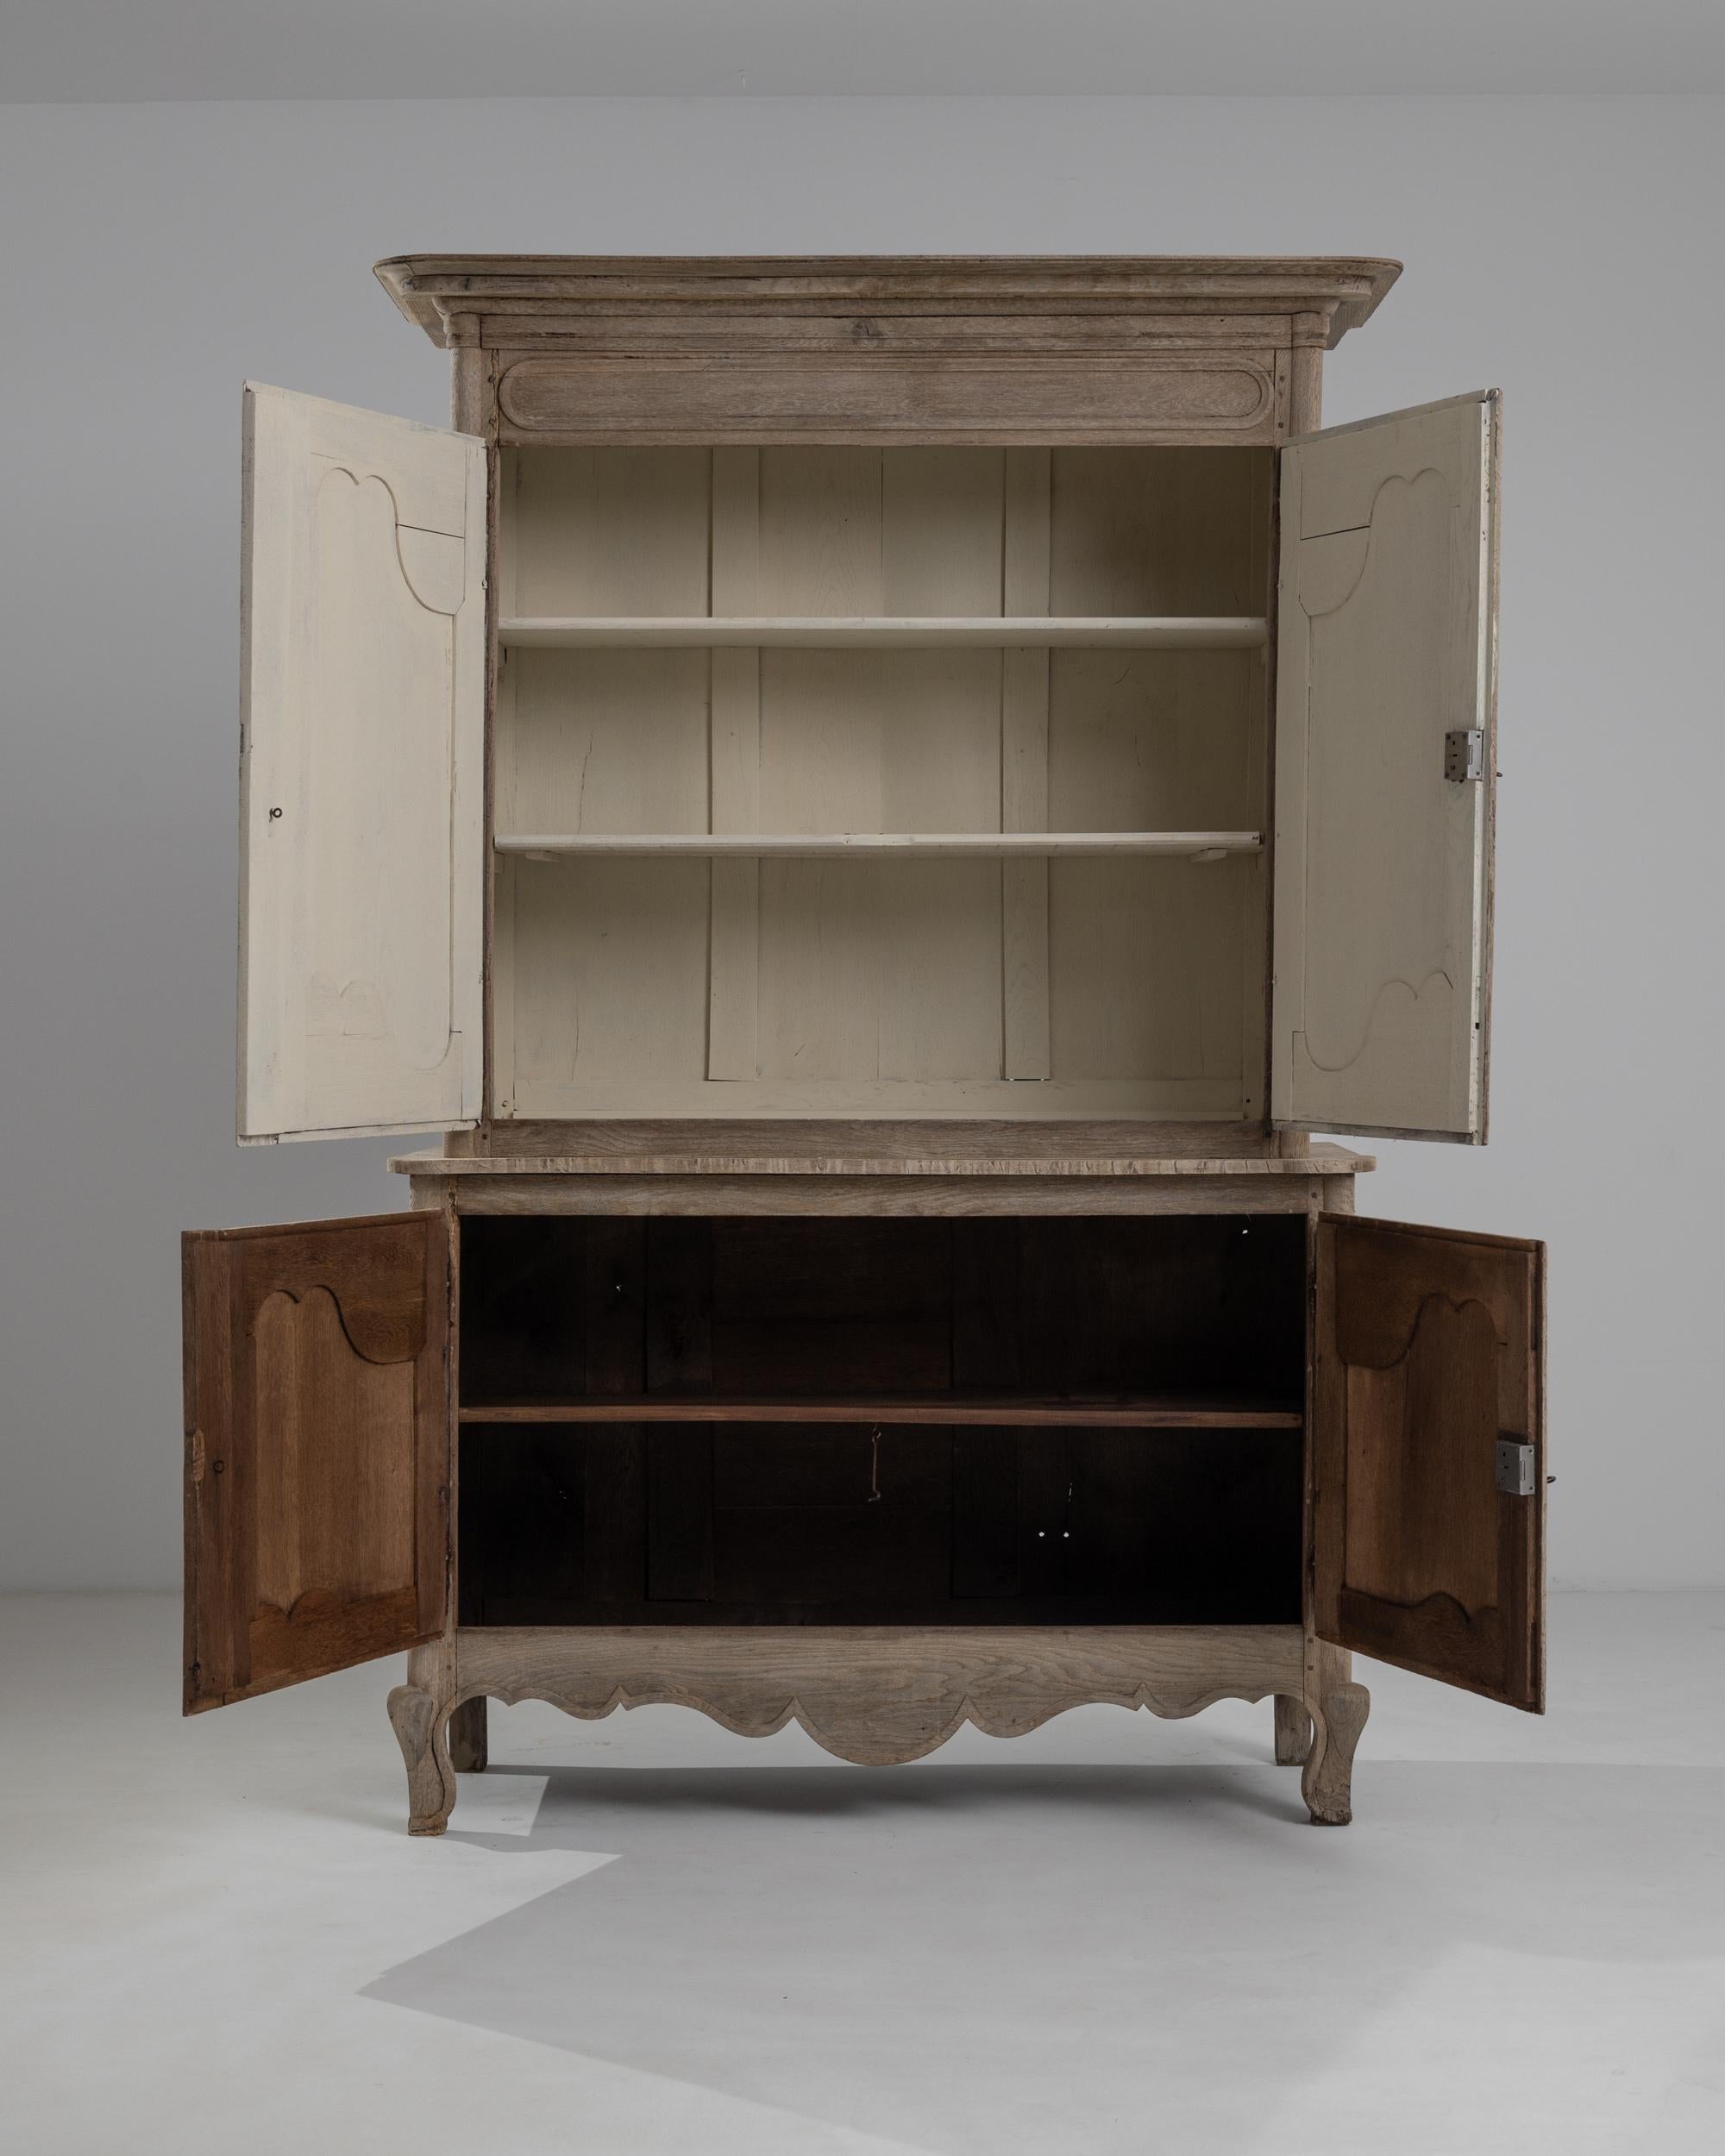 The ashen hue of the bleached oak accentuates the grandeur of this vintage buffet ‘a deux corps’ handcrafted in France circa 1850. Crowned with a molded cornice, this chest boasts deep curvilinear carvings of the panel doors echoed in the waves of